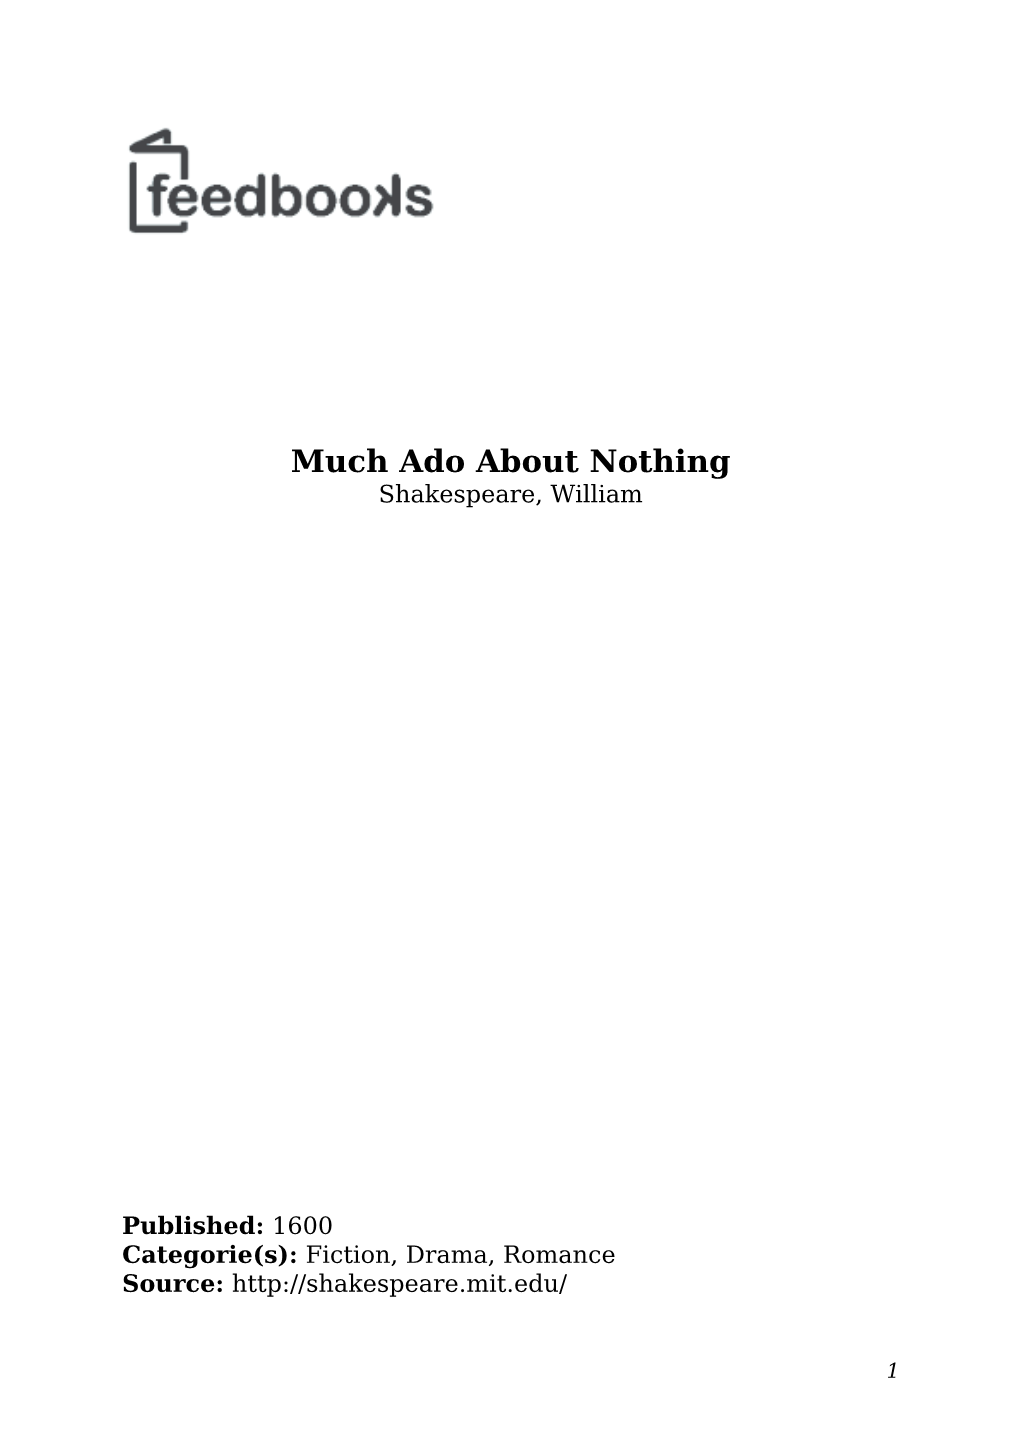 Much Ado About Nothing (PDF)